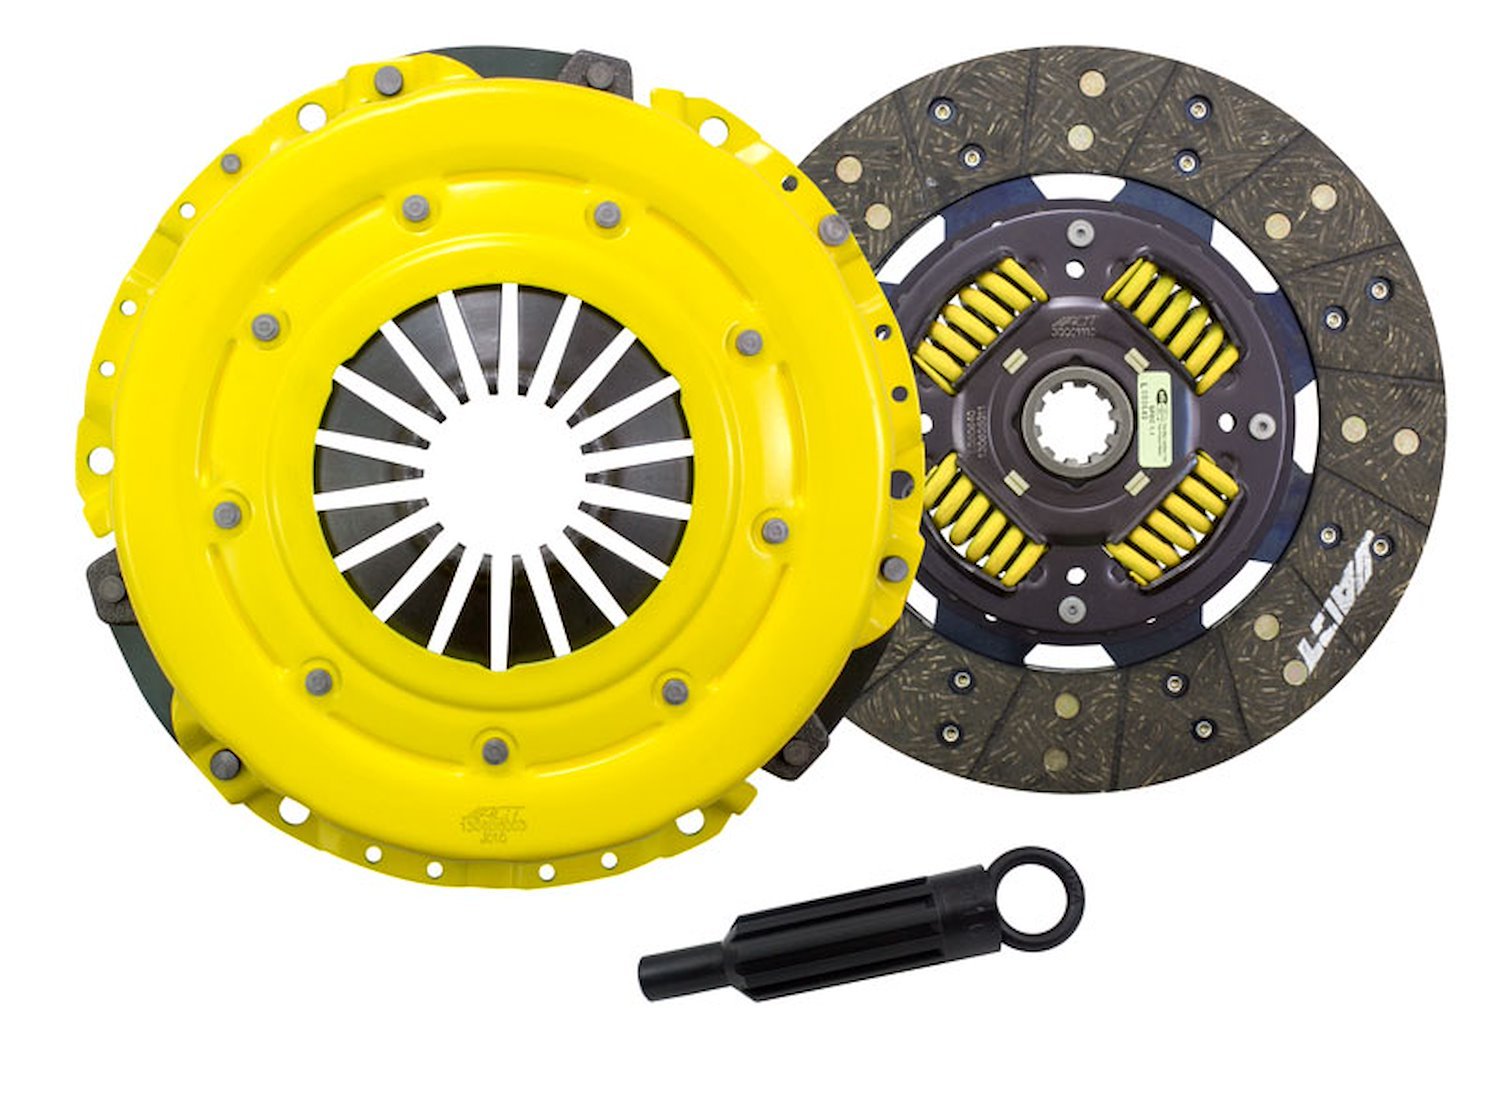 HD-O/Performance Street Sprung Transmission Clutch Kit Fits Select Jeep